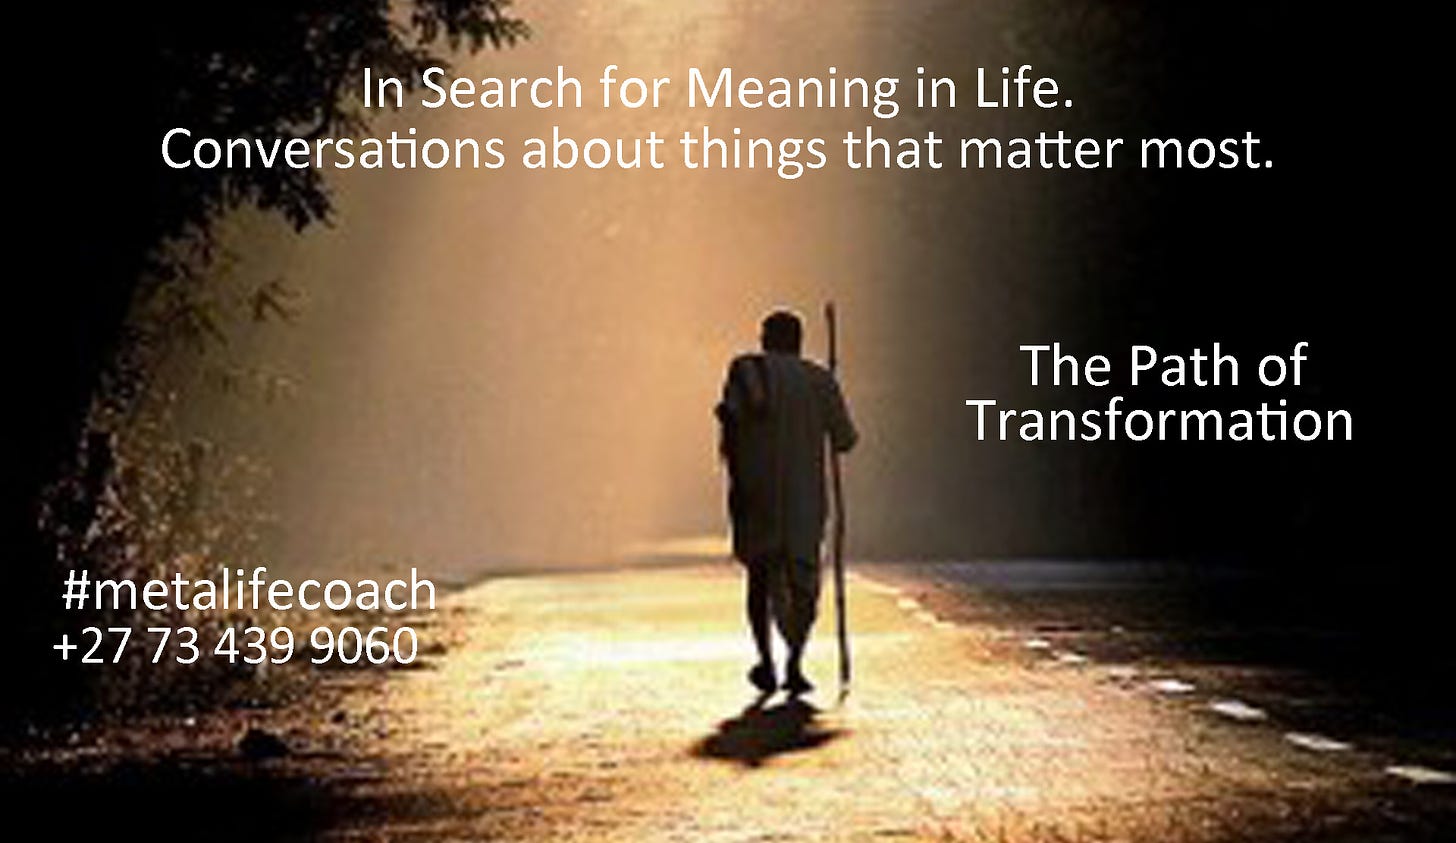 Search for Meaning in Life - Discuss what matters most. #metalifecoach